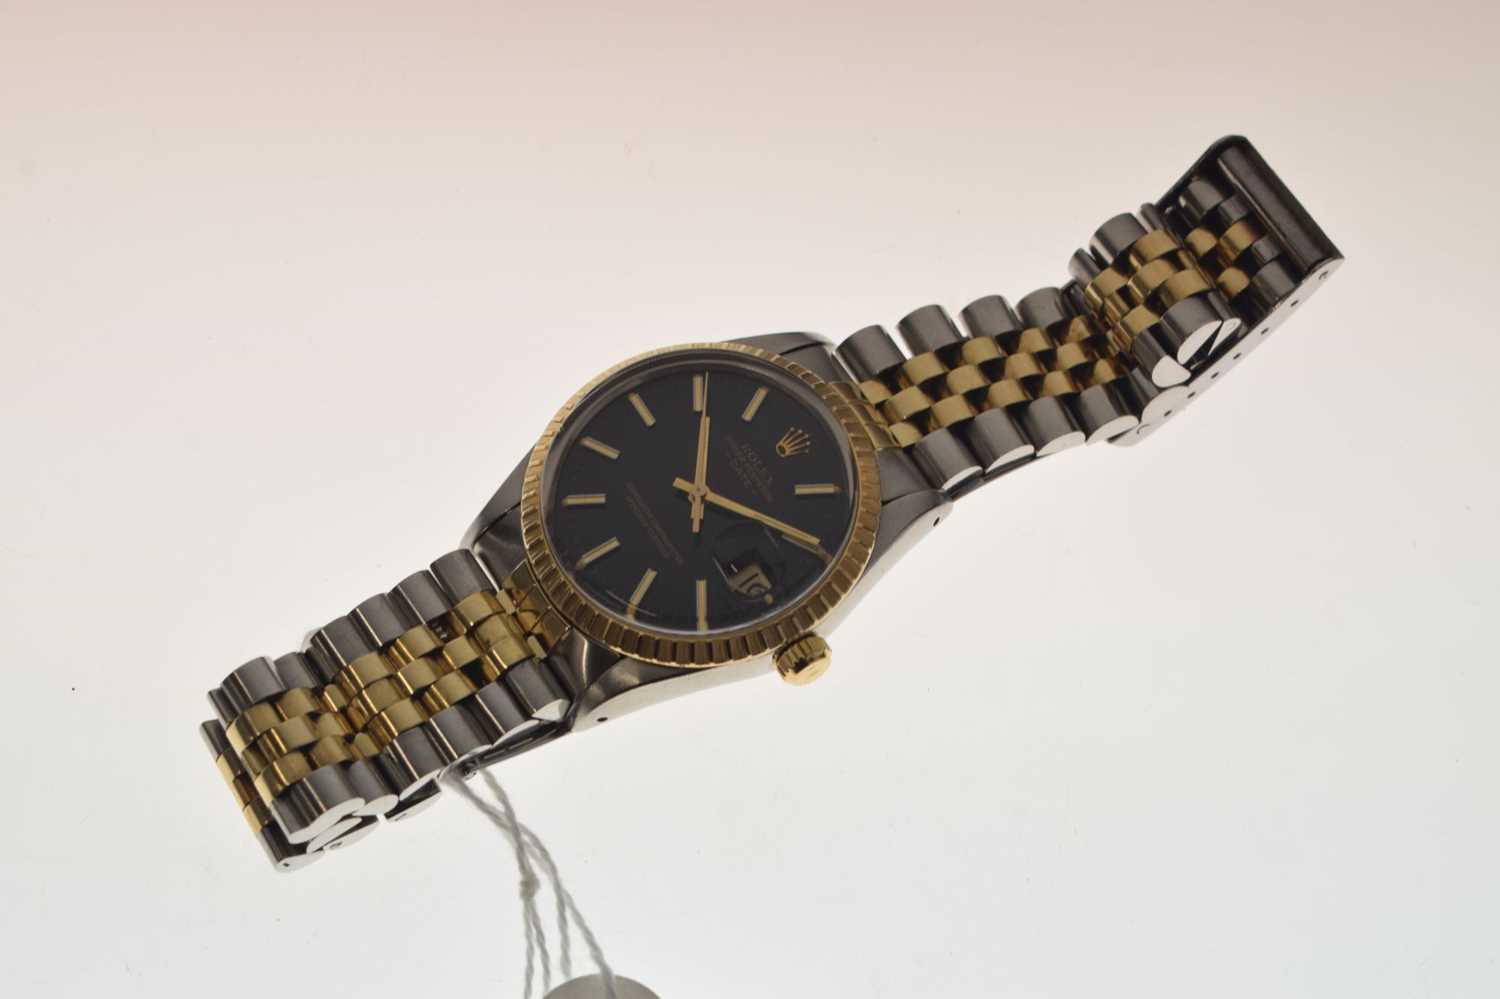 Rolex - Early 1980s Datejust Oyster Perpetual Superlative Chronometer - Image 2 of 16